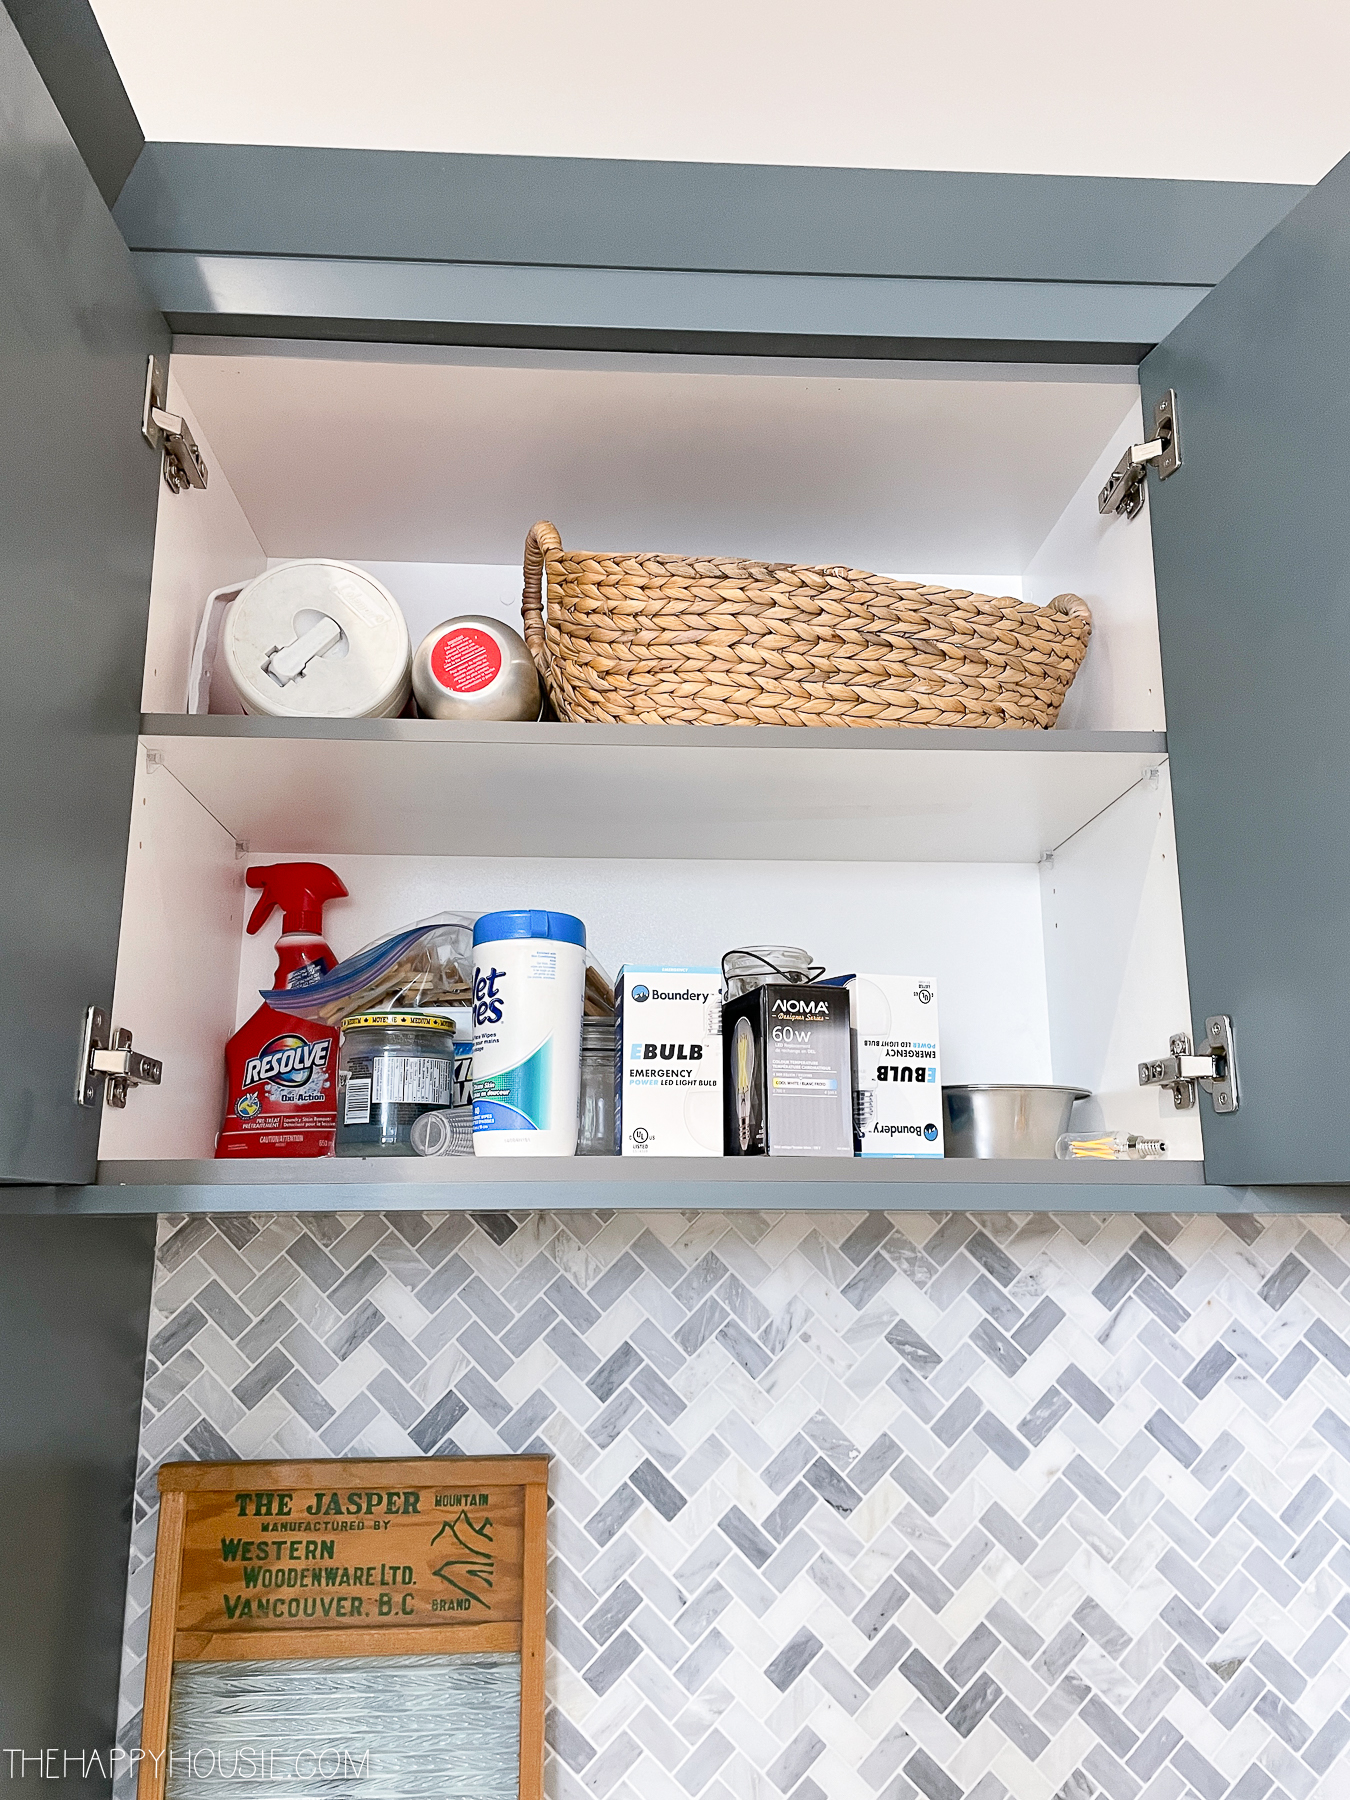 A cupboard in the laundry room above the counter with various cleaning and laundry supplies.